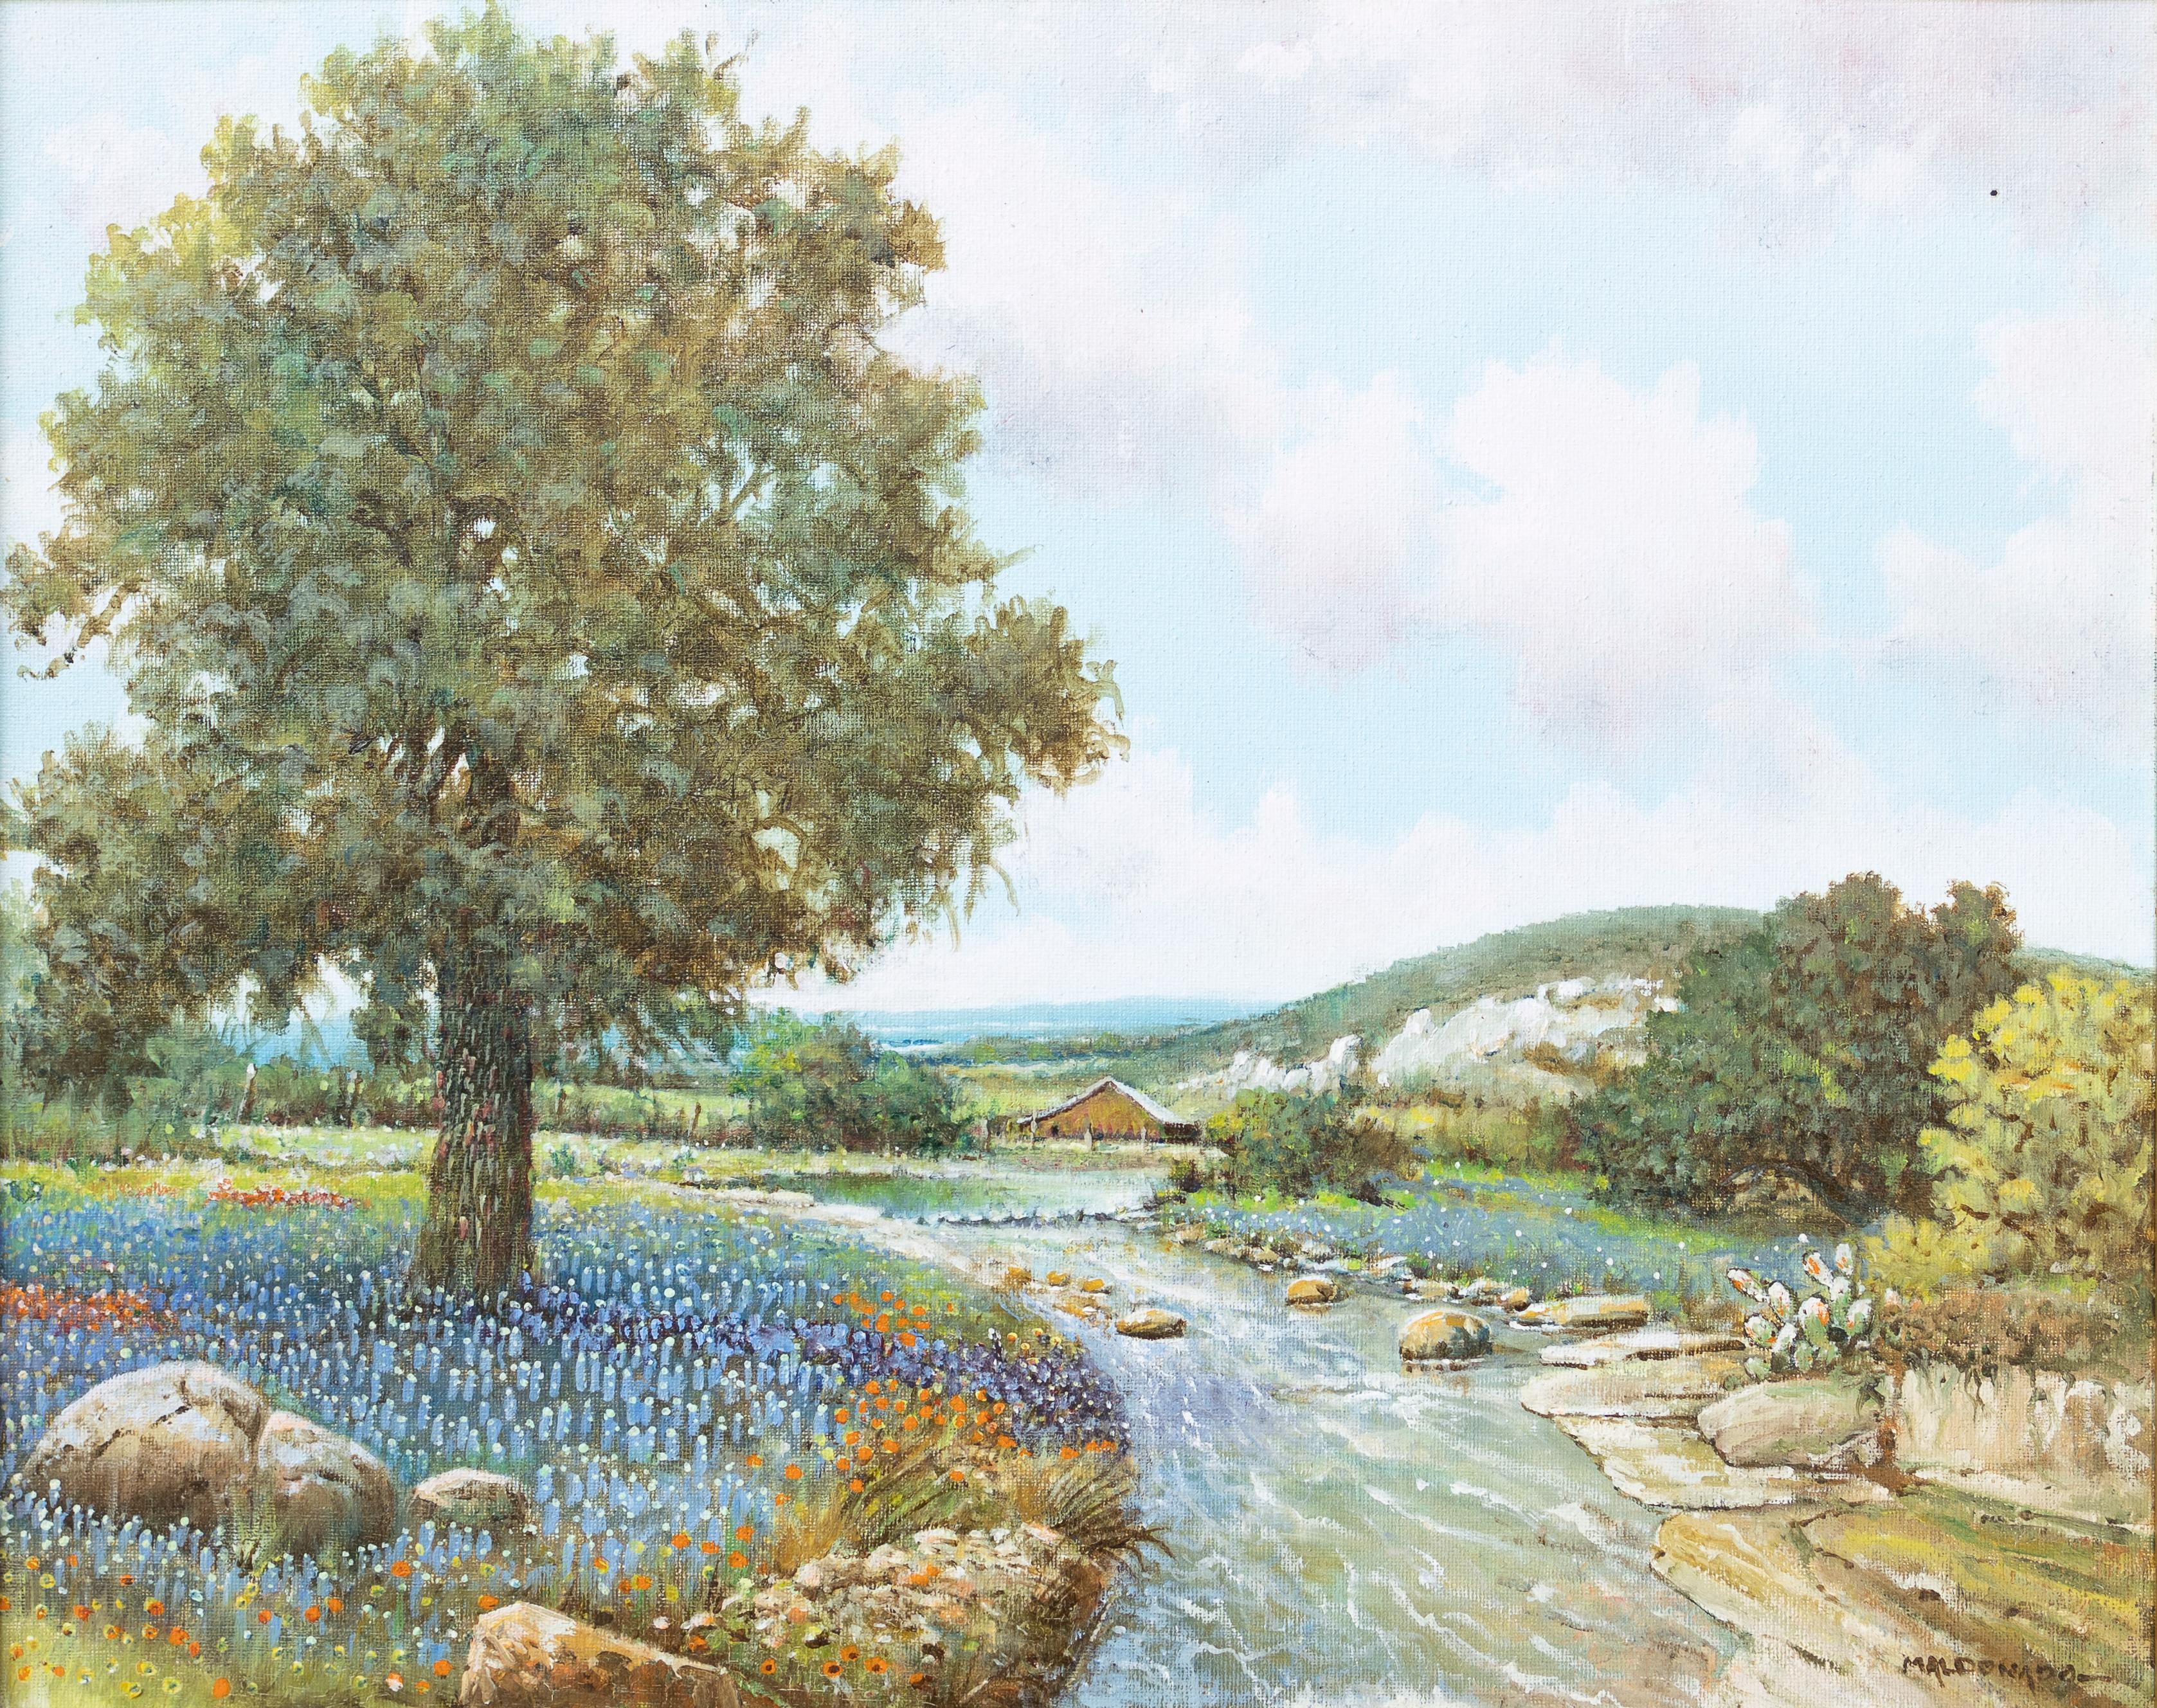 Daniel Maldonado Landscape Painting - Springtime in the Texas Hill Country with Bluebonnets